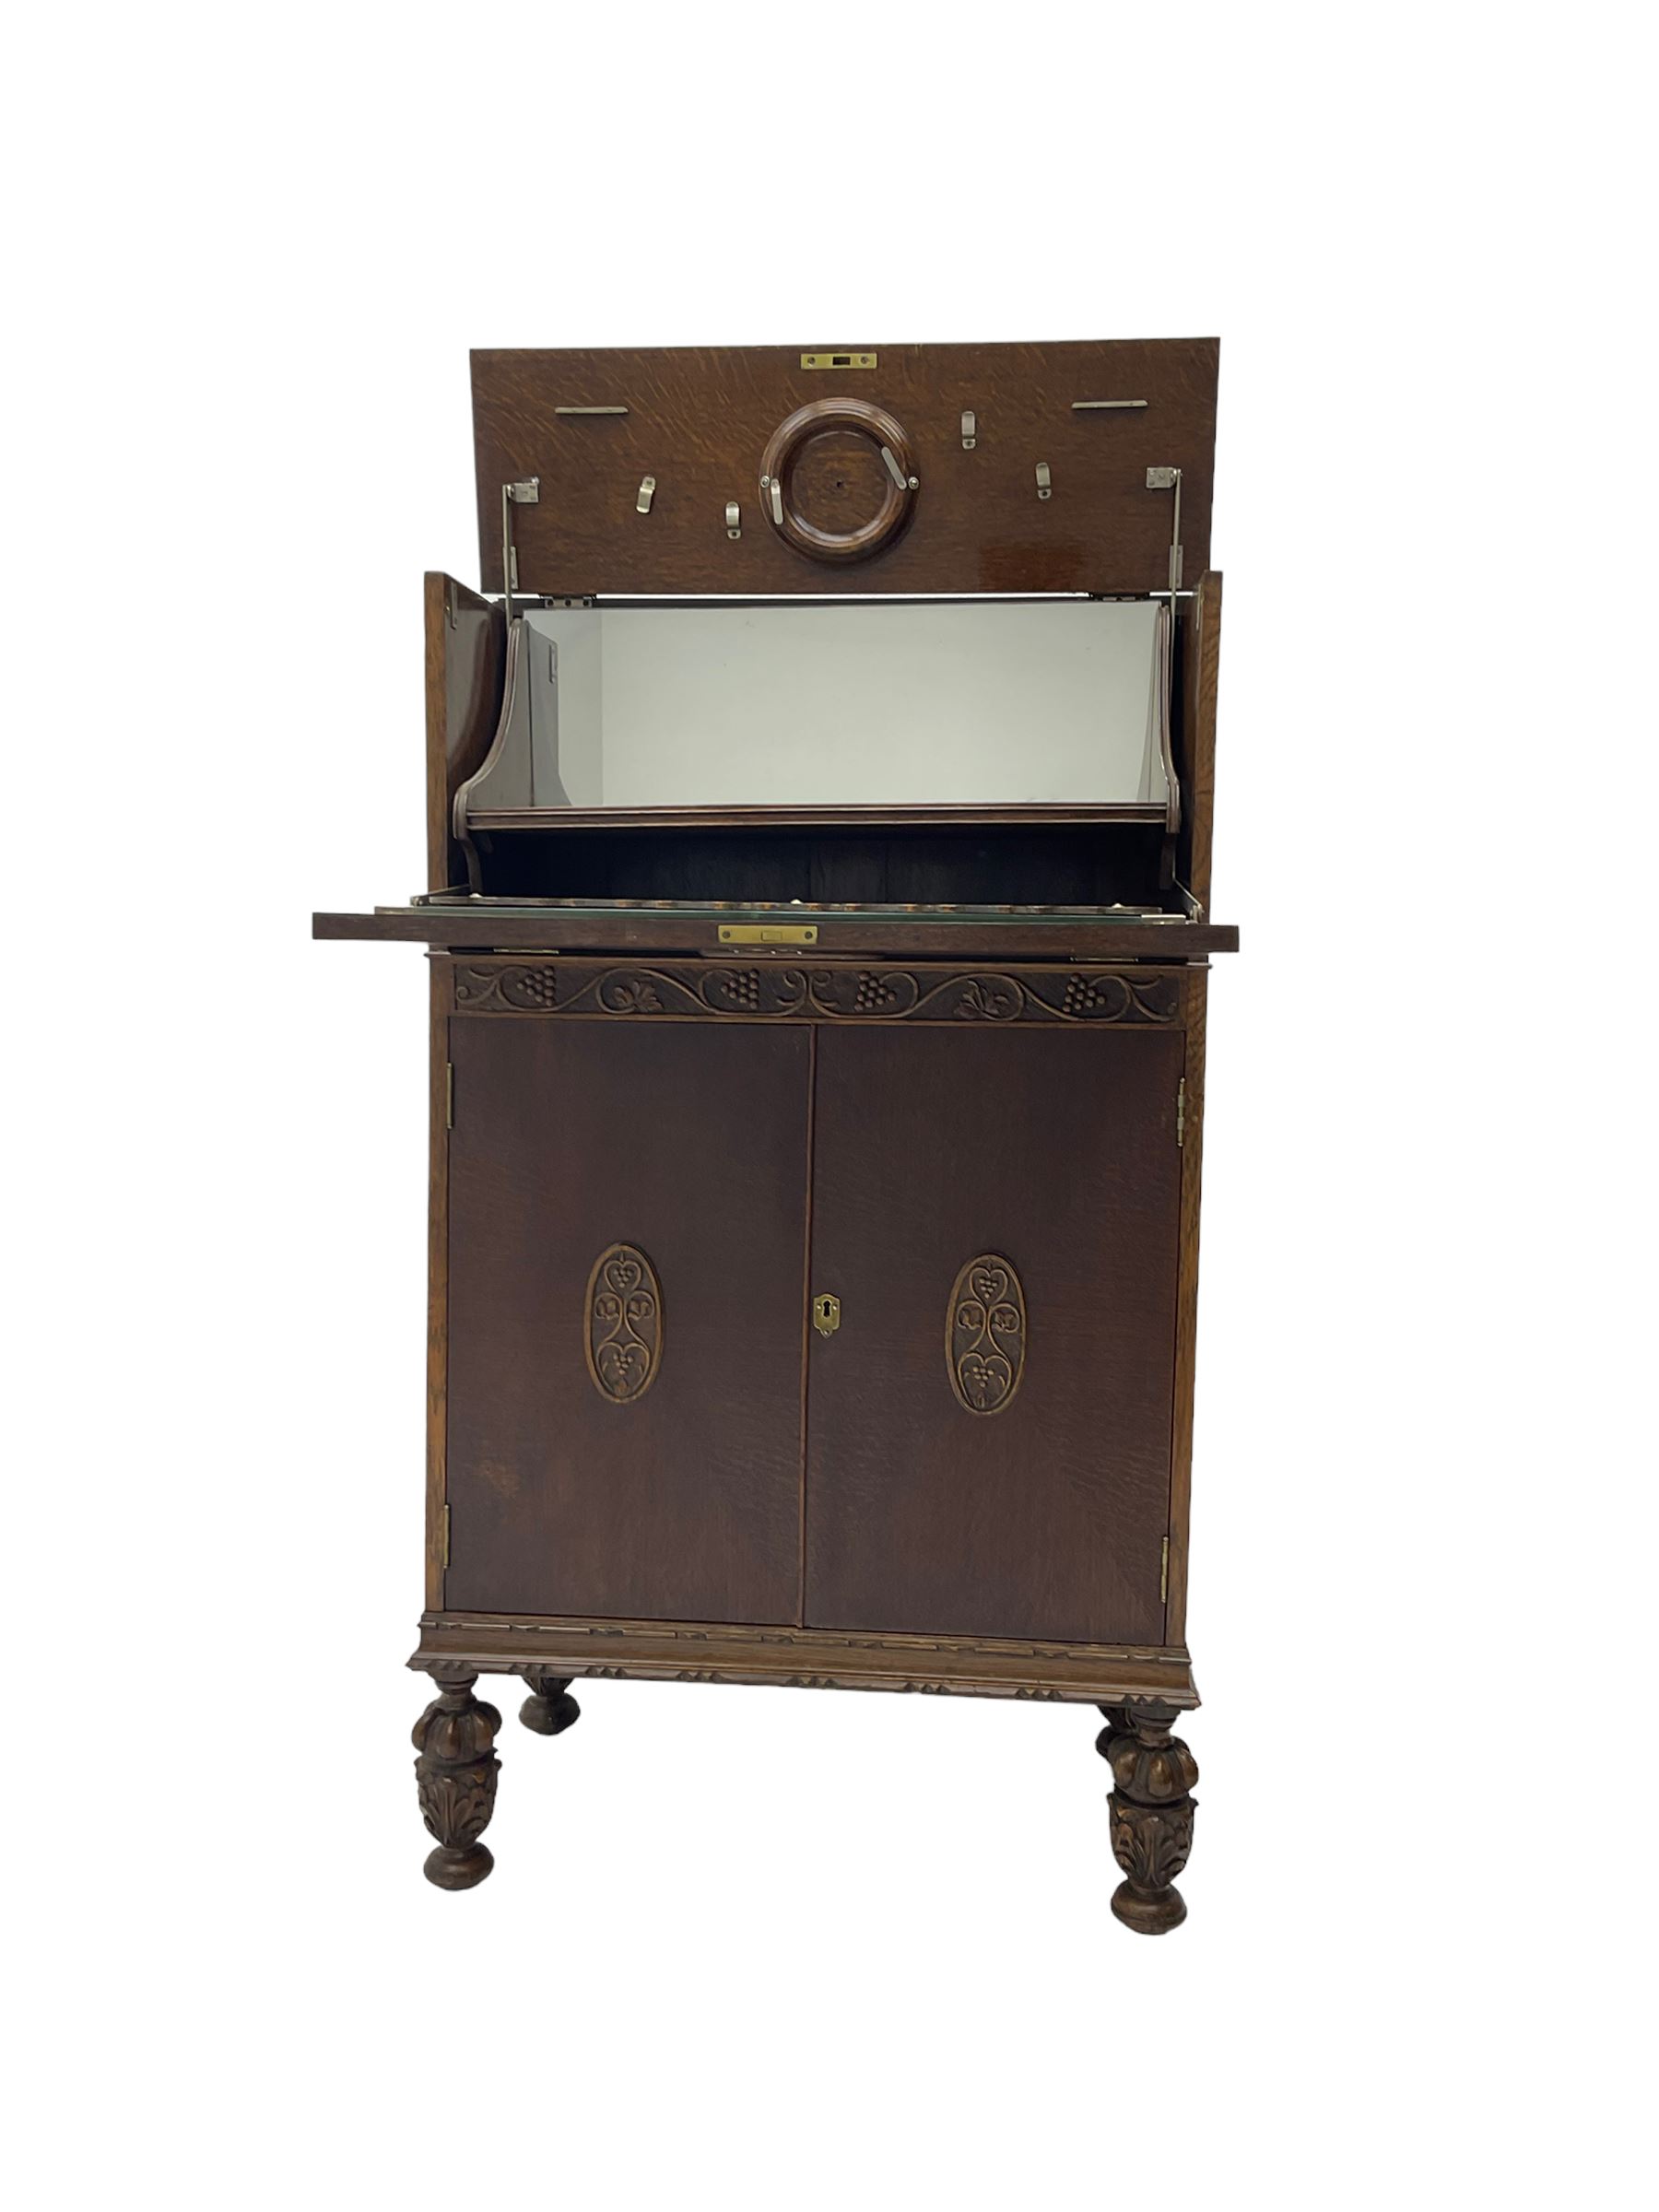 Early 20th century oak cocktail cabinet - Image 2 of 5